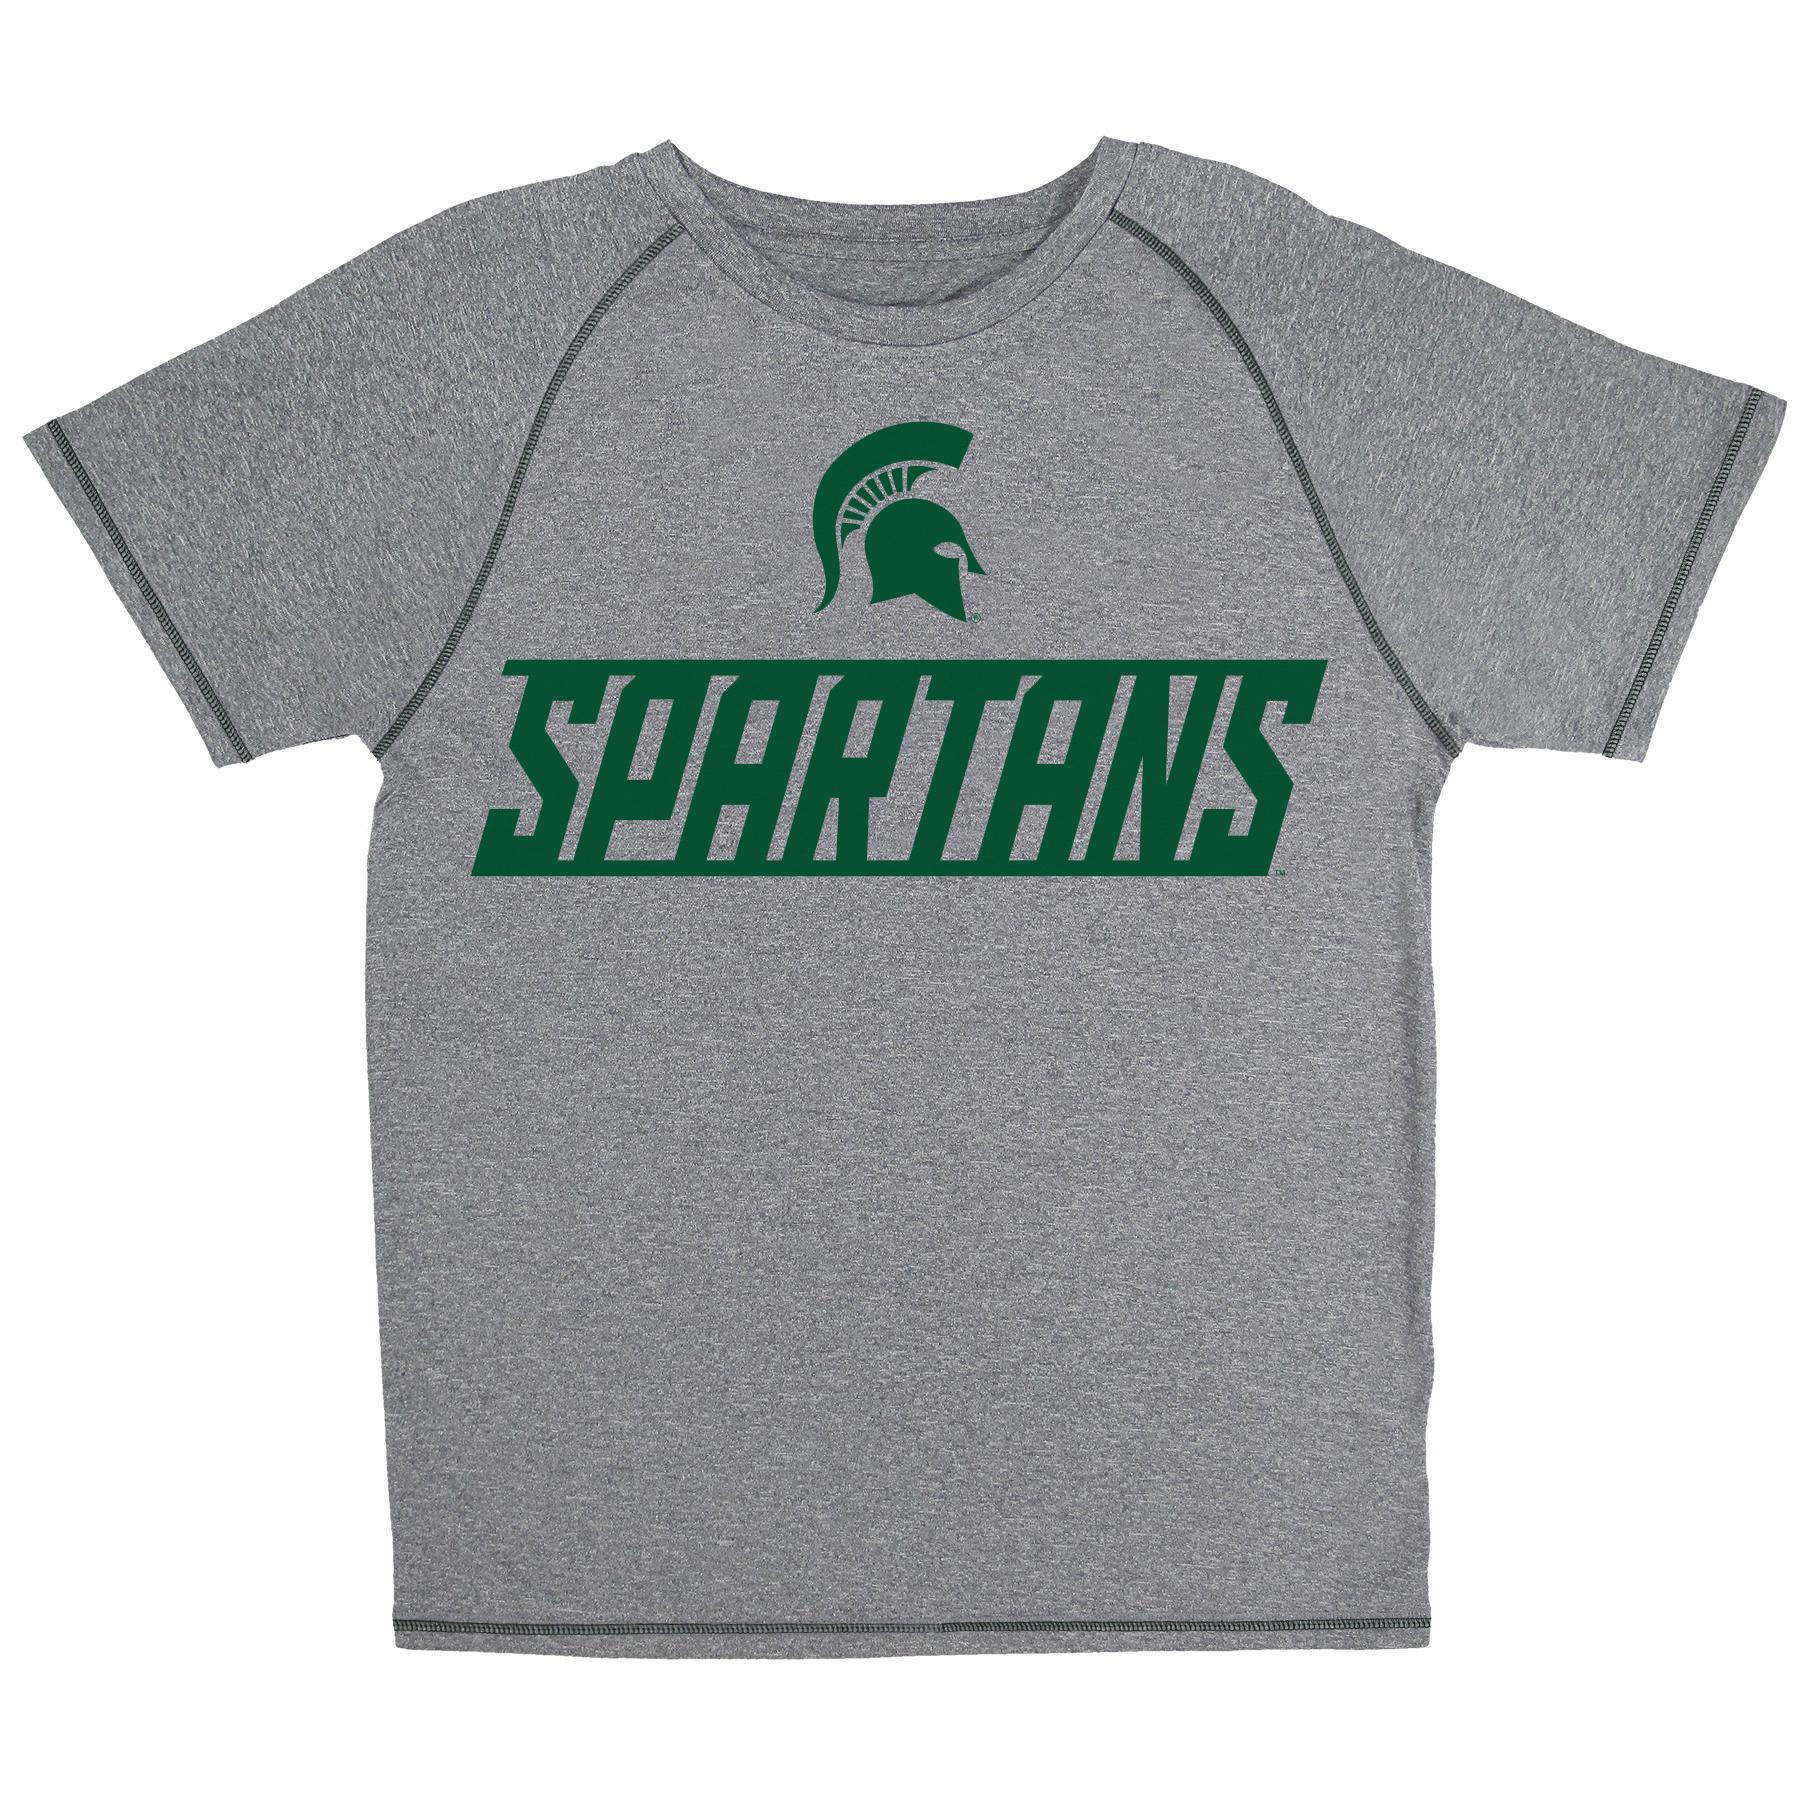 NCAA Boy's Graphic T-Shirt - Michigan State University Spartans